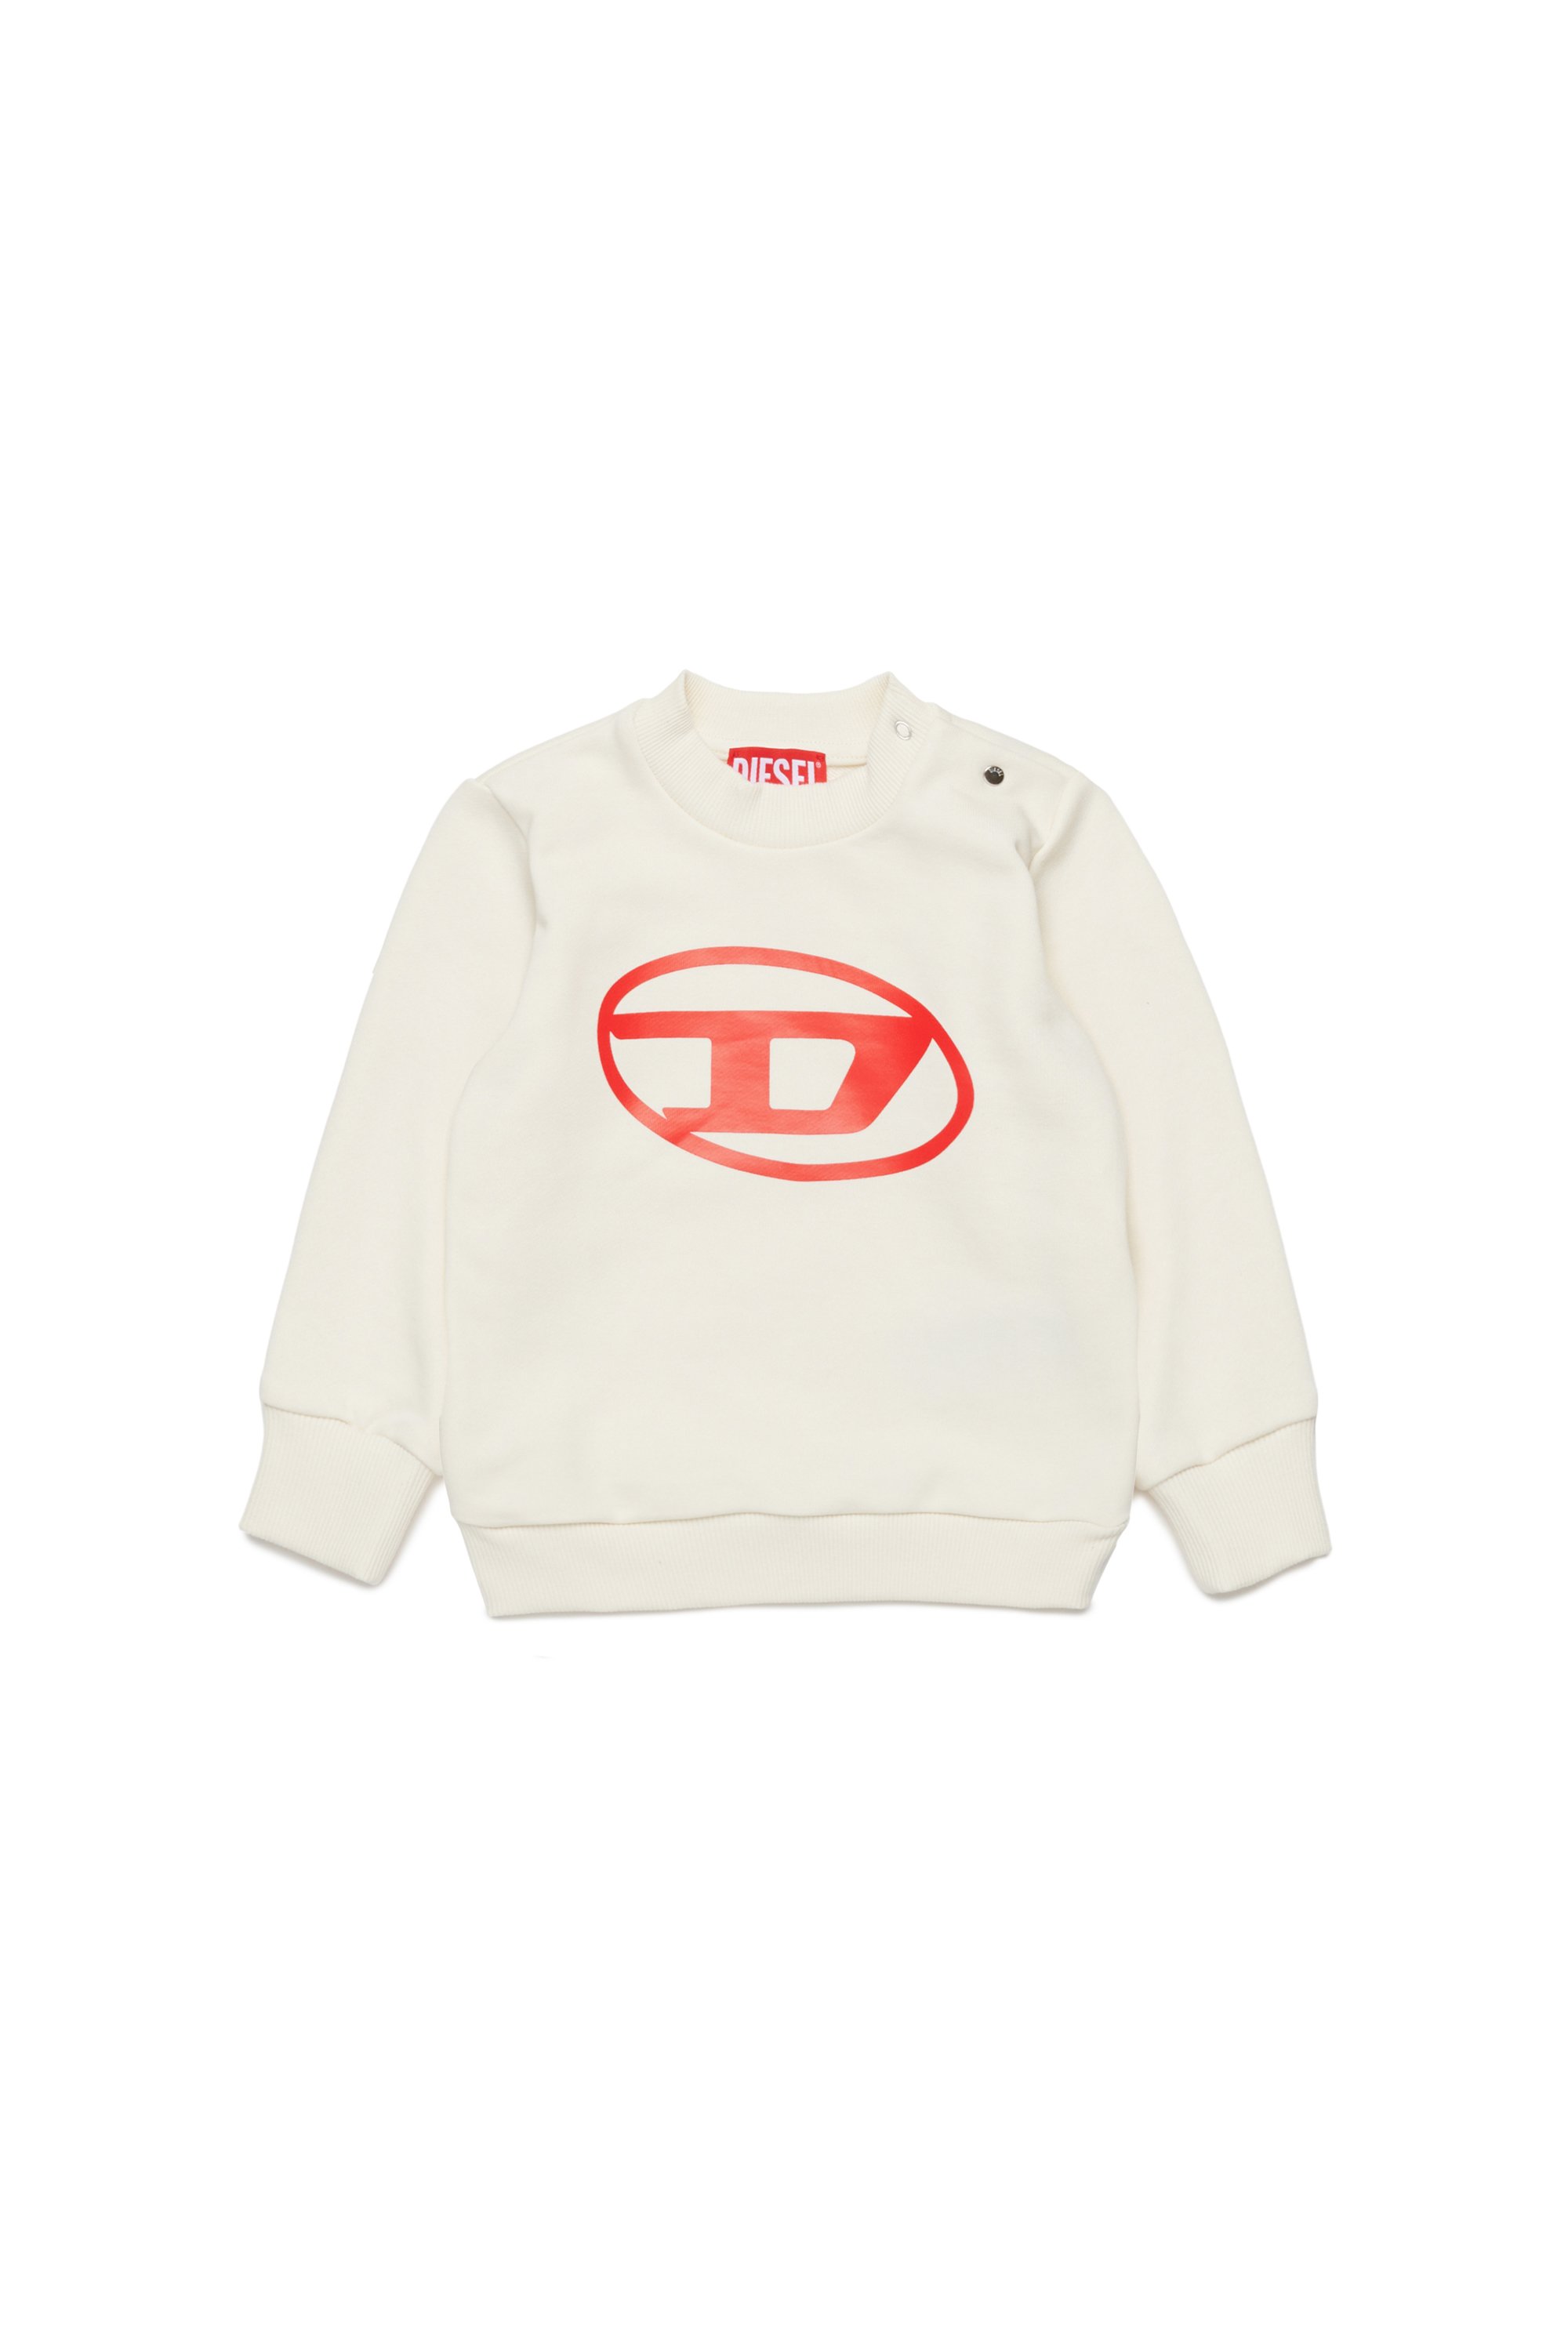 Diesel - SCERB, Unisex Sweatshirt with Oval D print in White - Image 1